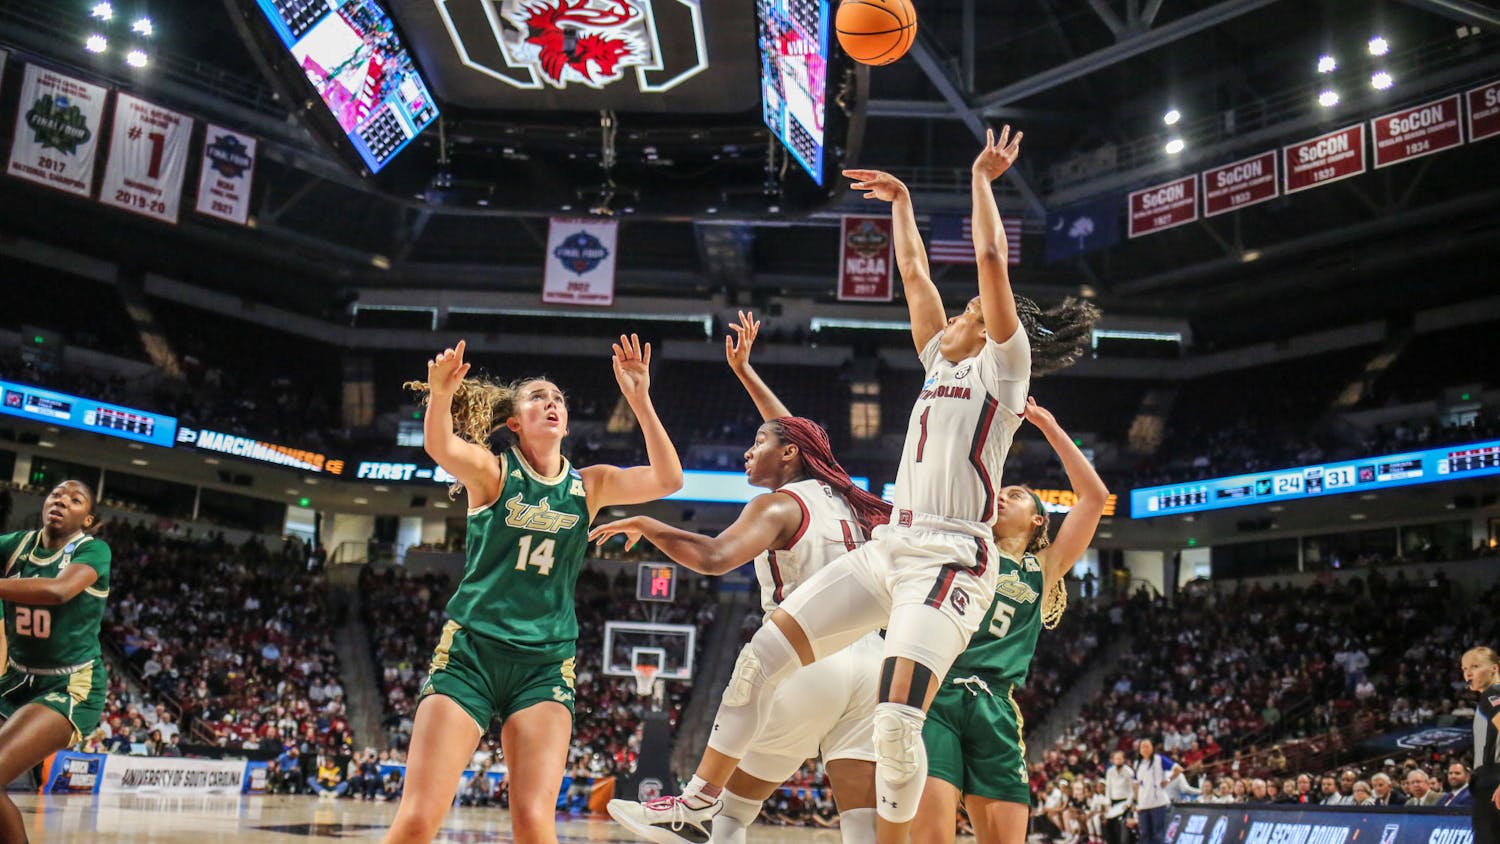 The Gamecock women's basketball team defeated the South Florida Bulls 76-45 in the second round of the NCAA Women's Basketball Tournament at Colonial Life Arena on March 19, 2023. The Gamecocks advanced to the Sweet 16 set to take place from March 24 to 25 in Greenville, S.C.&nbsp;